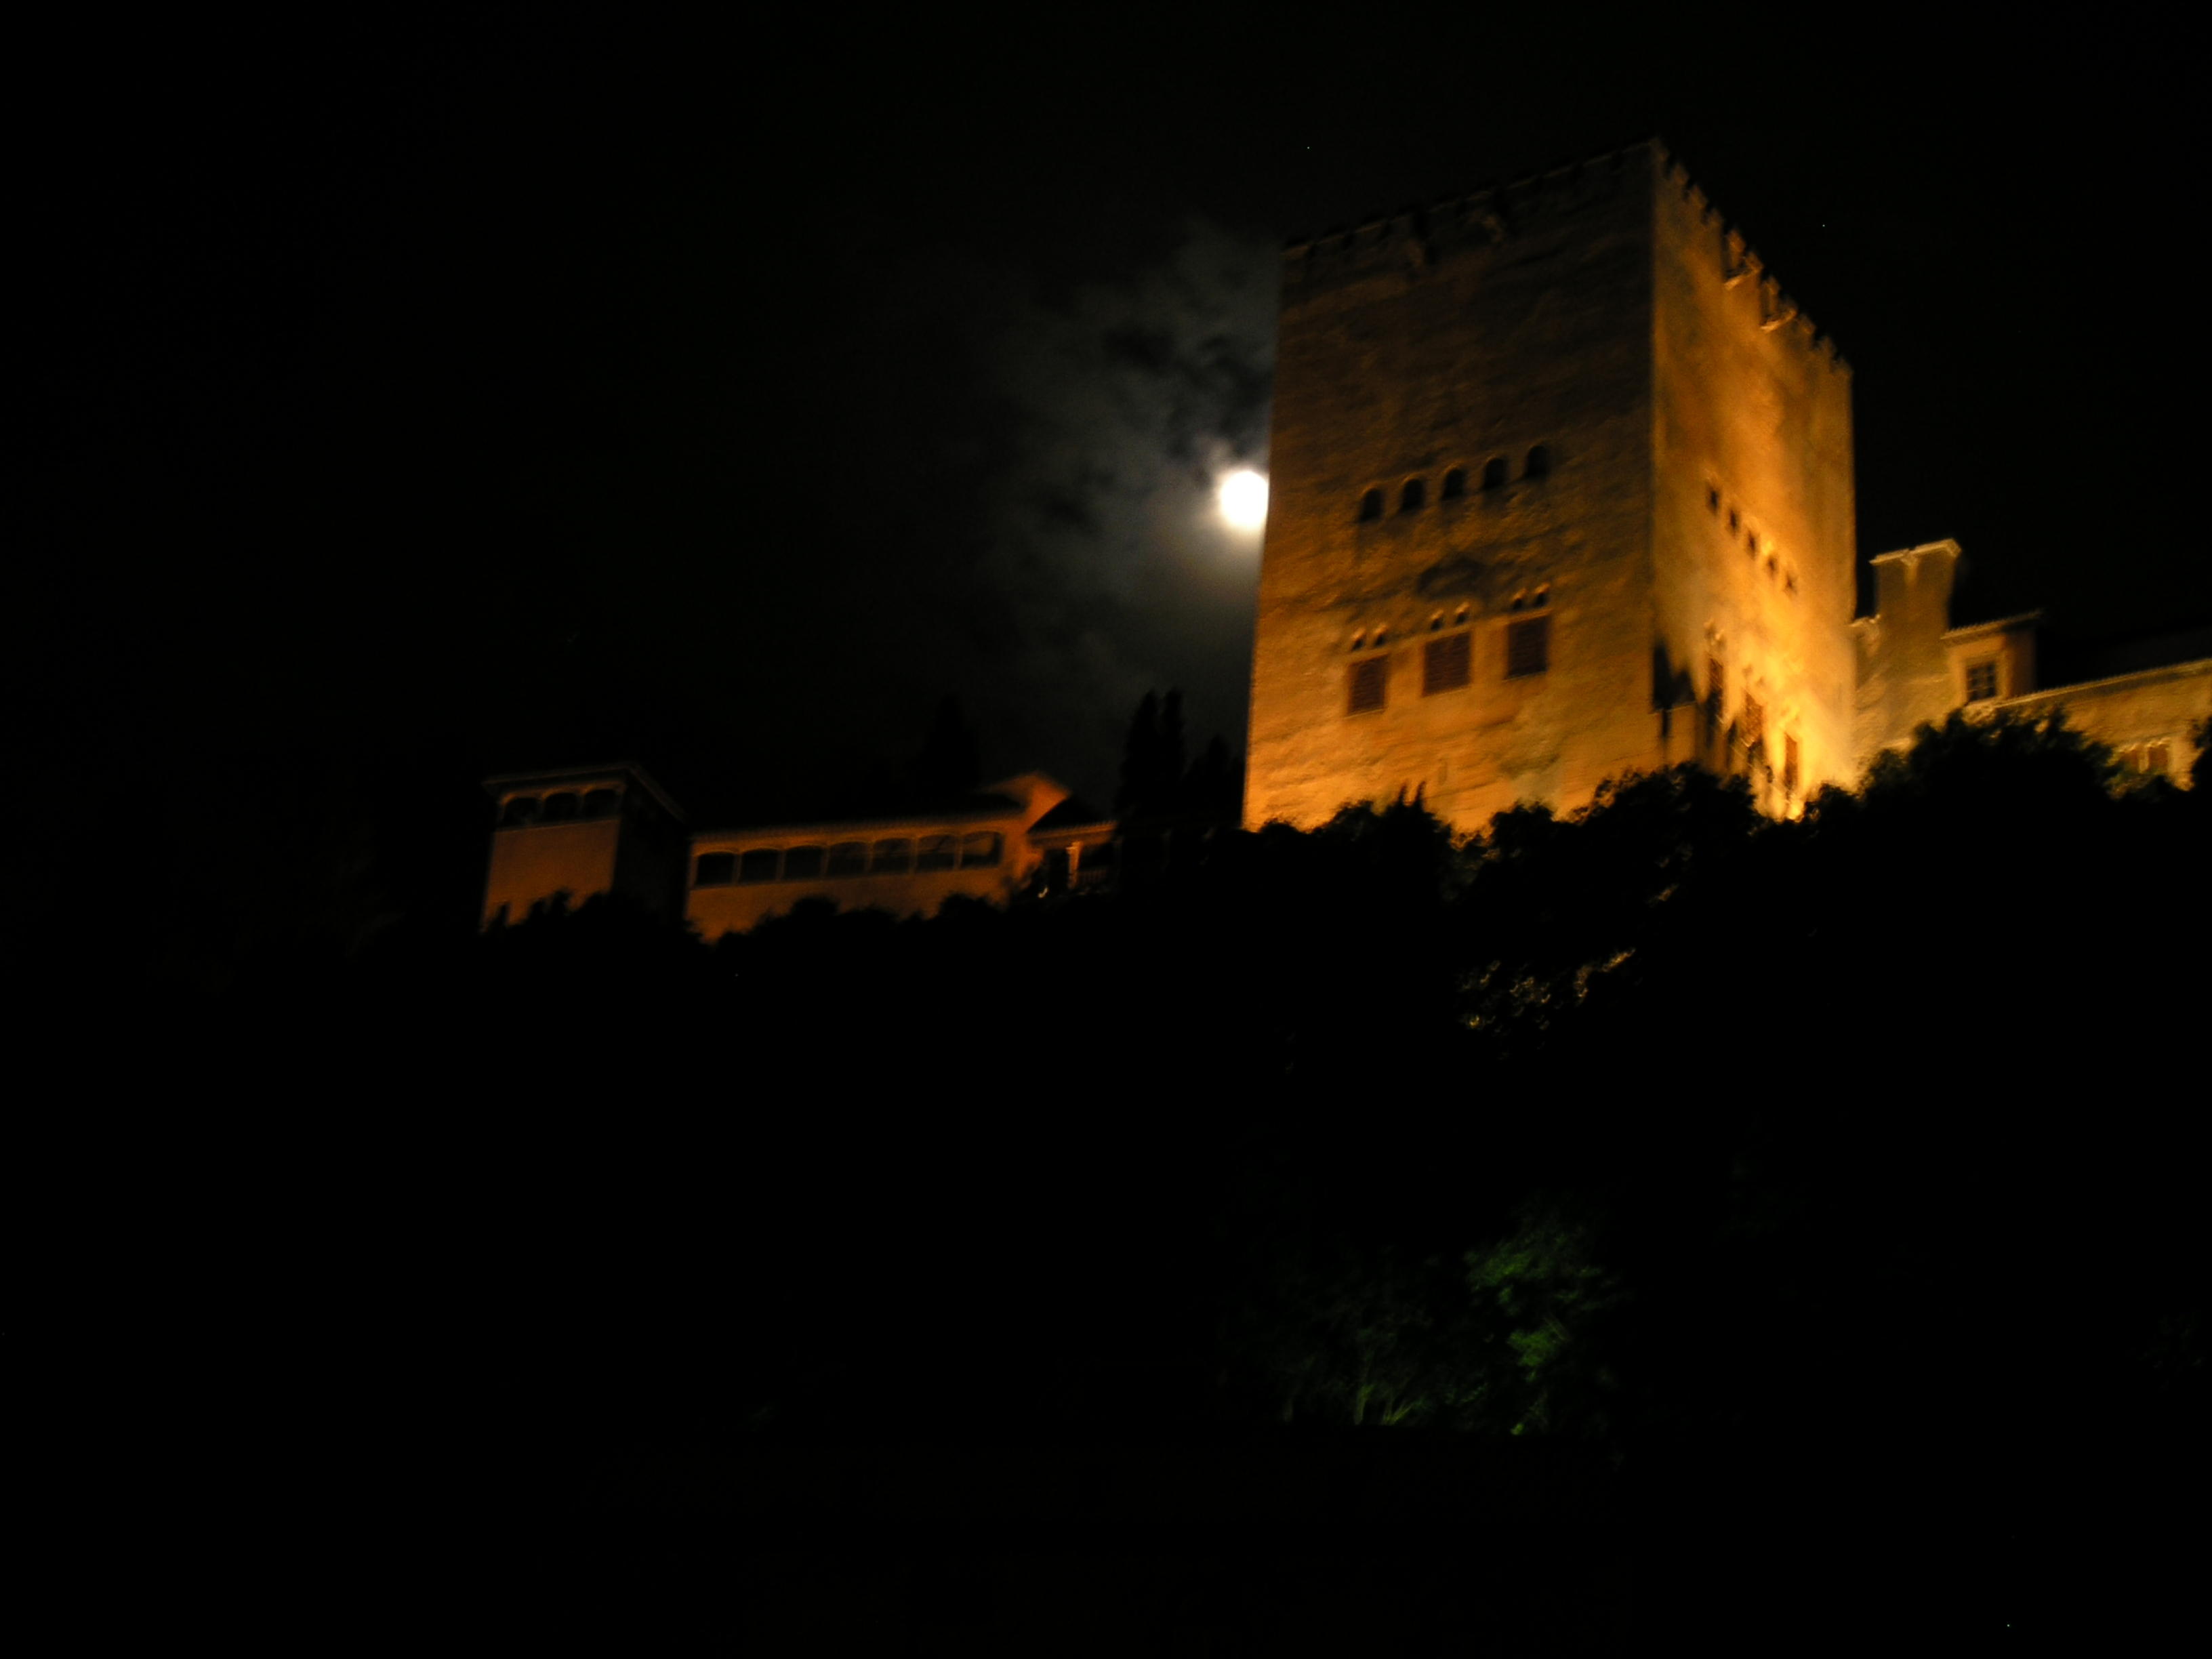 Moon Shining Brightly Over the Alhambra